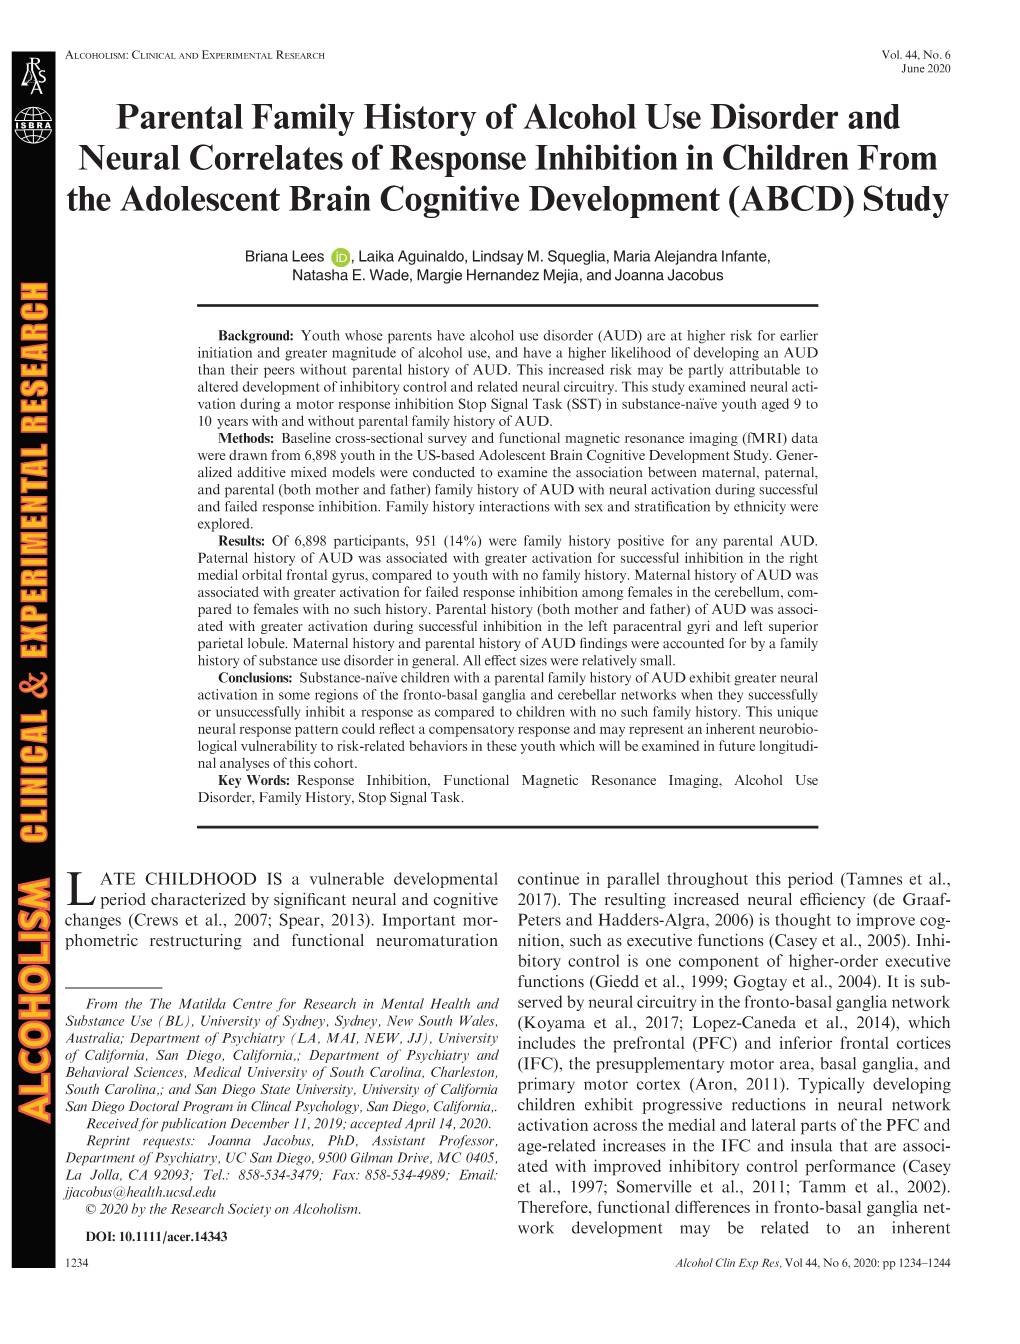 Parental Family History of Alcohol Use Disorder and Neural Correlates of Response Inhibition in Children from the Adolescent Brain Cognitive Development (ABCD) Study